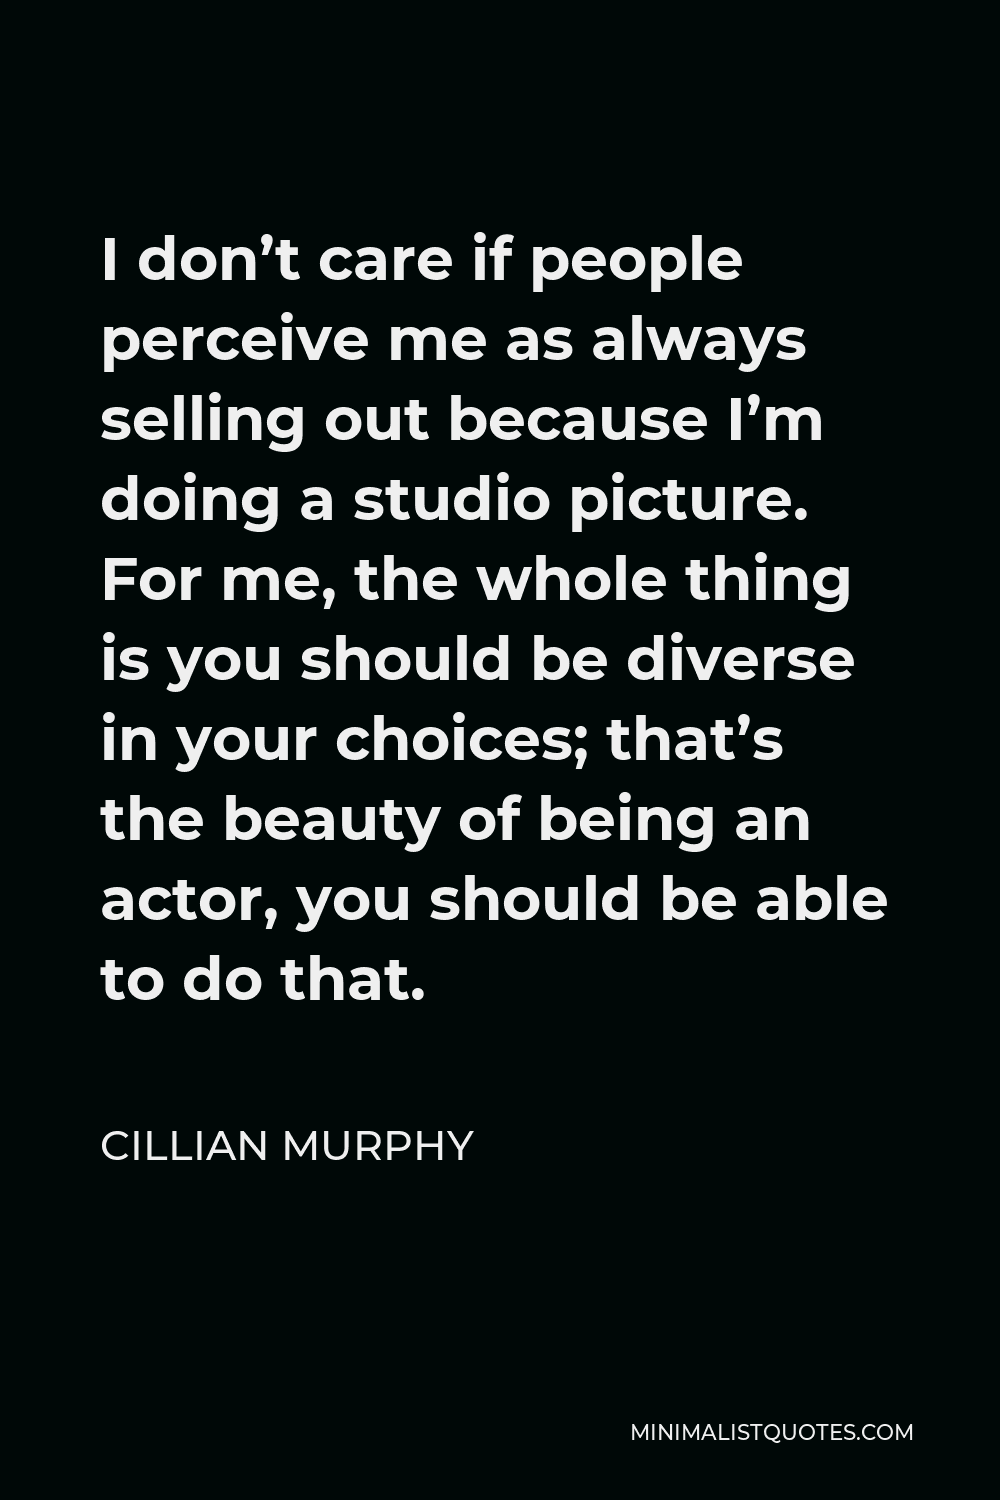 Cillian Murphy Quote - I don’t care if people perceive me as always selling out because I’m doing a studio picture. For me, the whole thing is you should be diverse in your choices; that’s the beauty of being an actor, you should be able to do that.